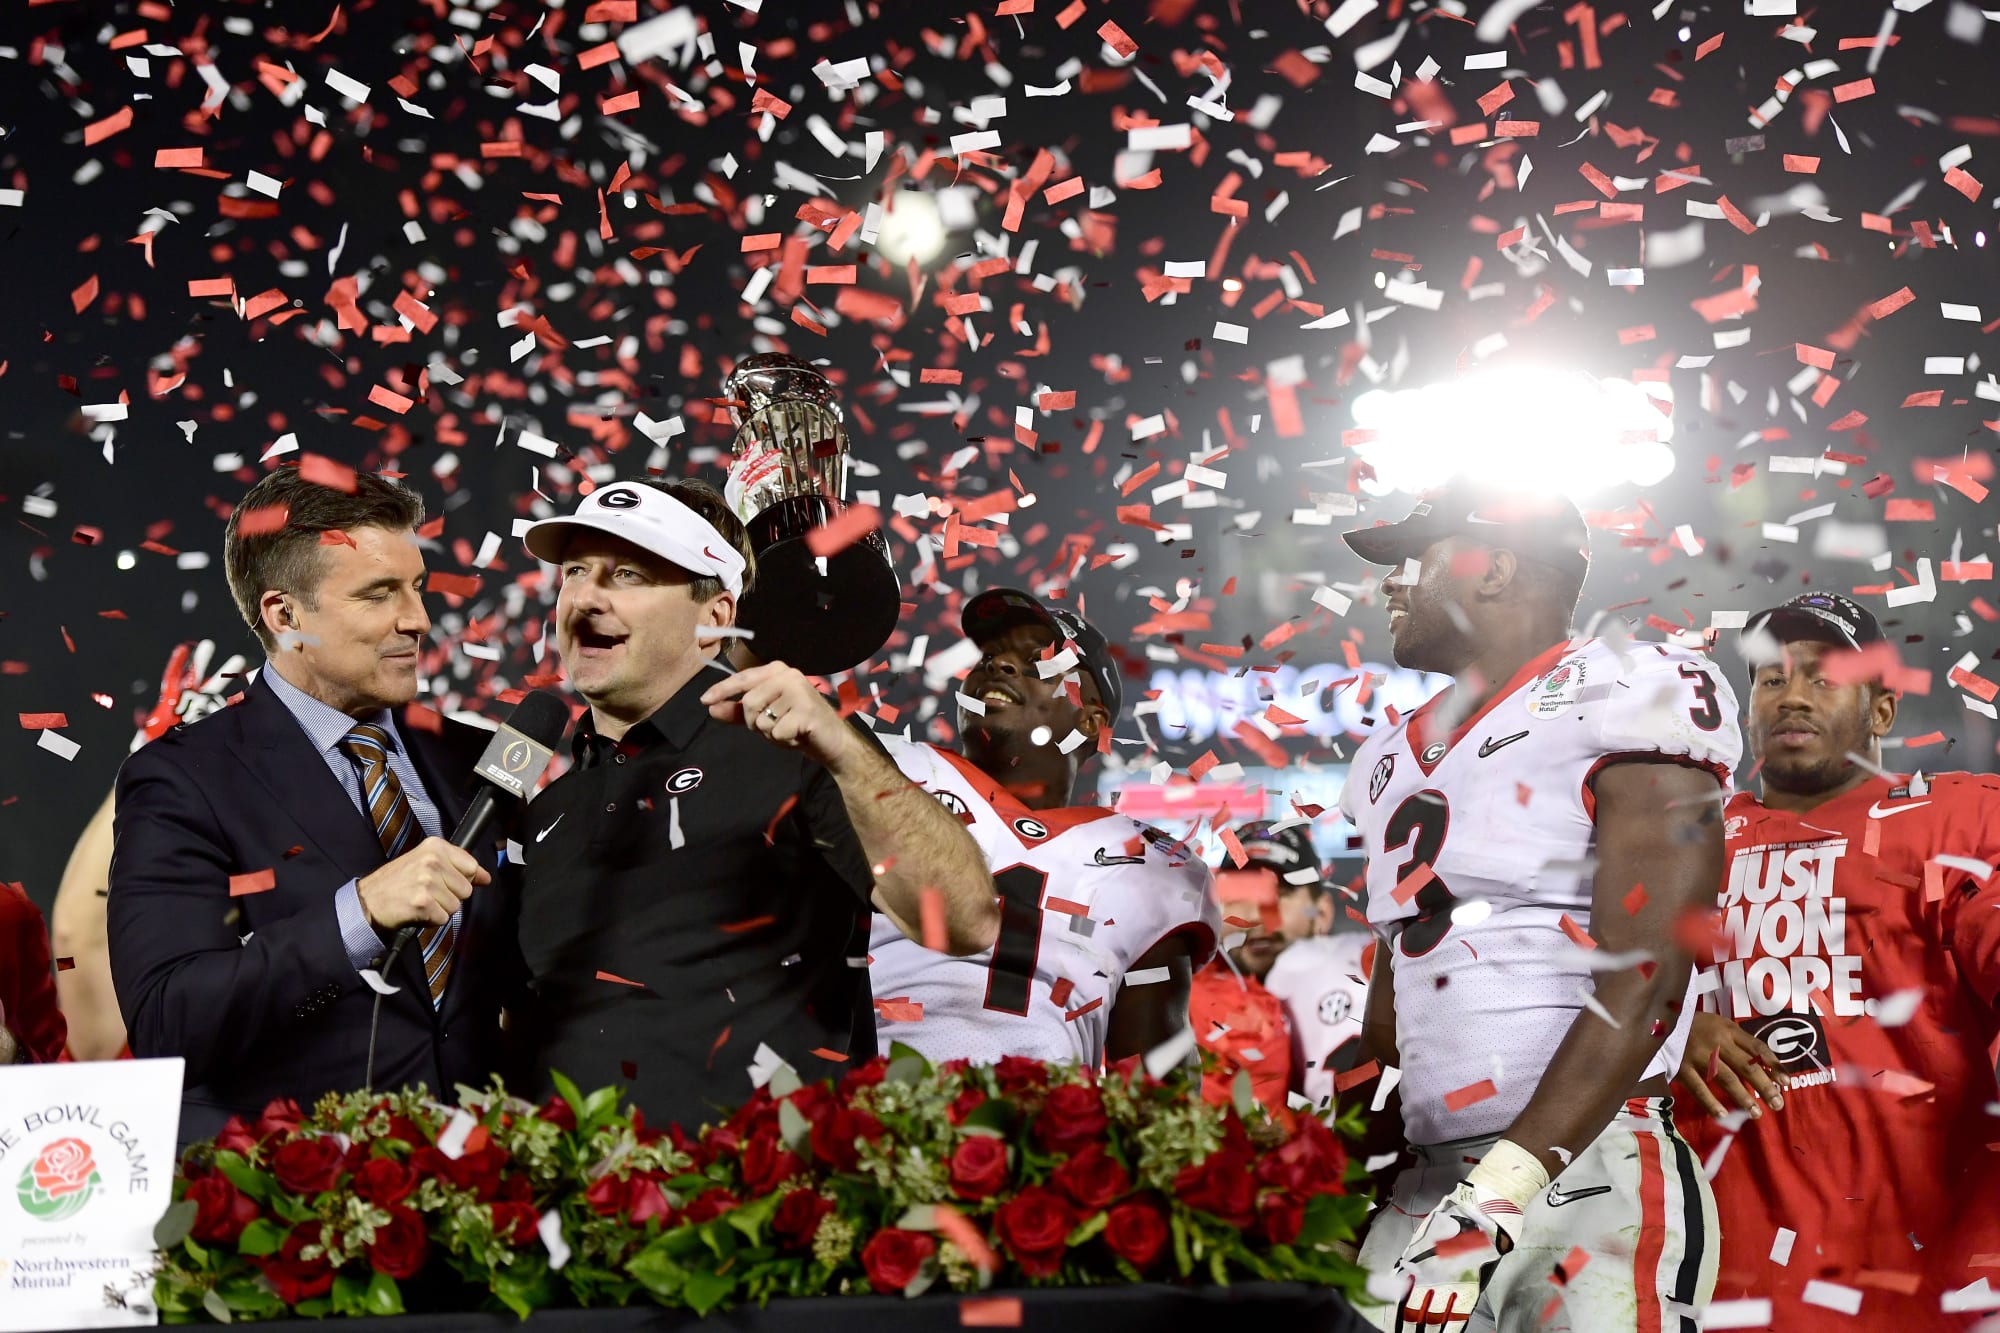 Football 3 Reasons Bulldogs will win the national title